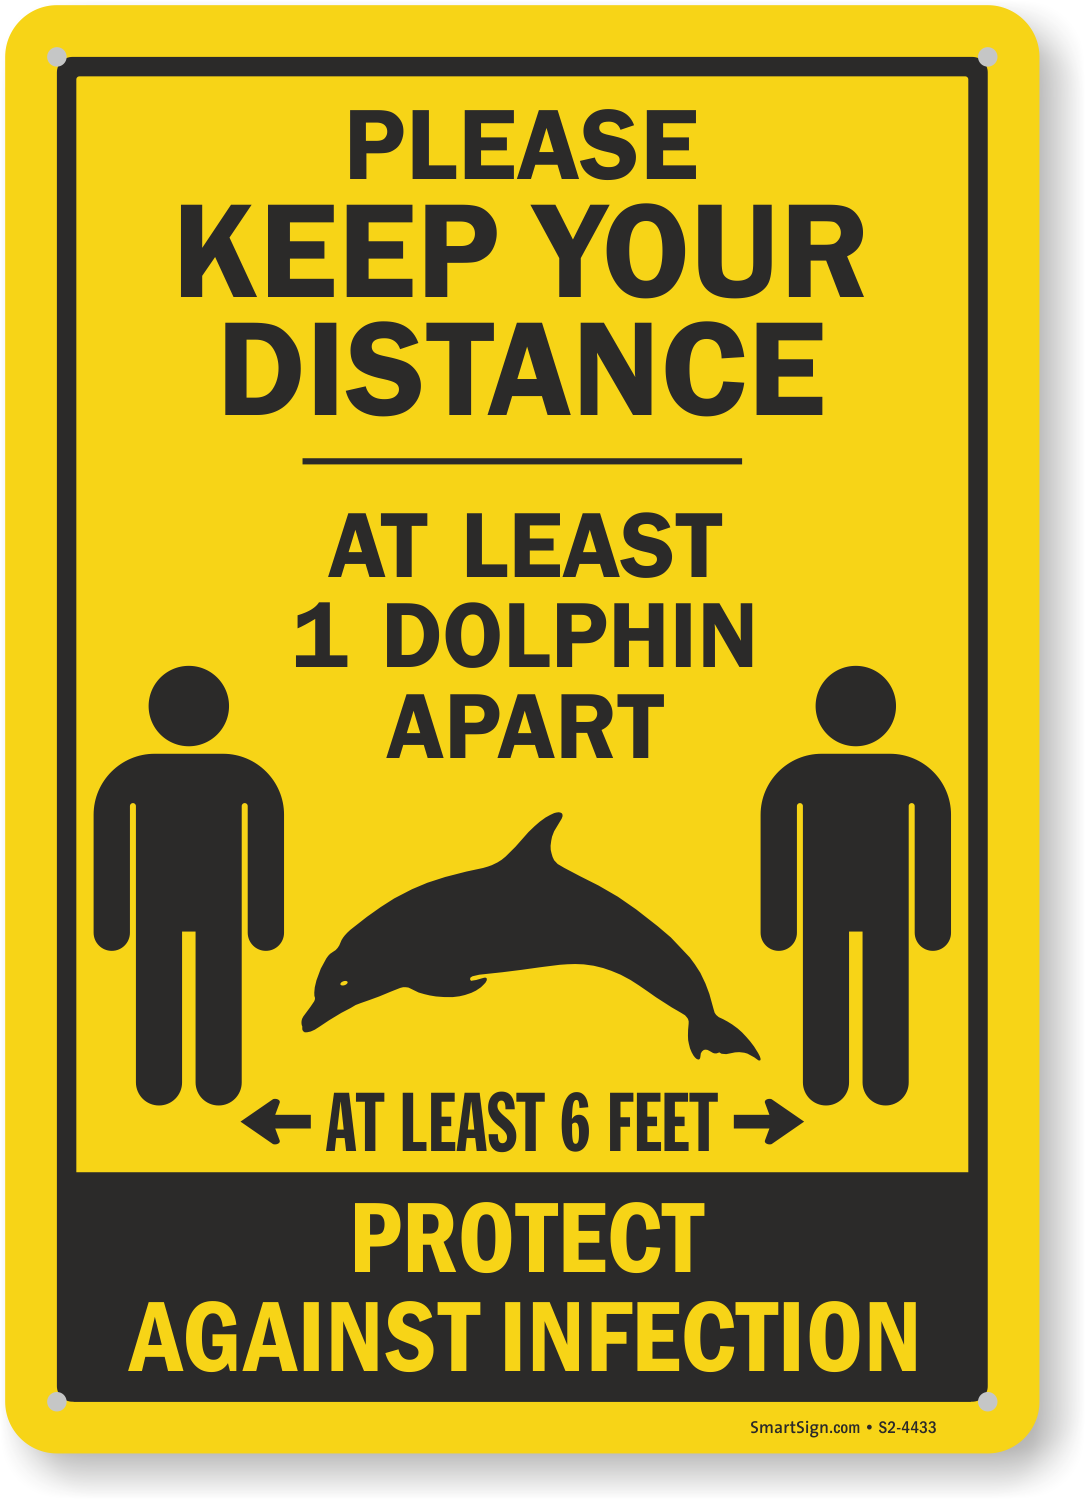 keep-your-distance-at-least-one-dolphin-